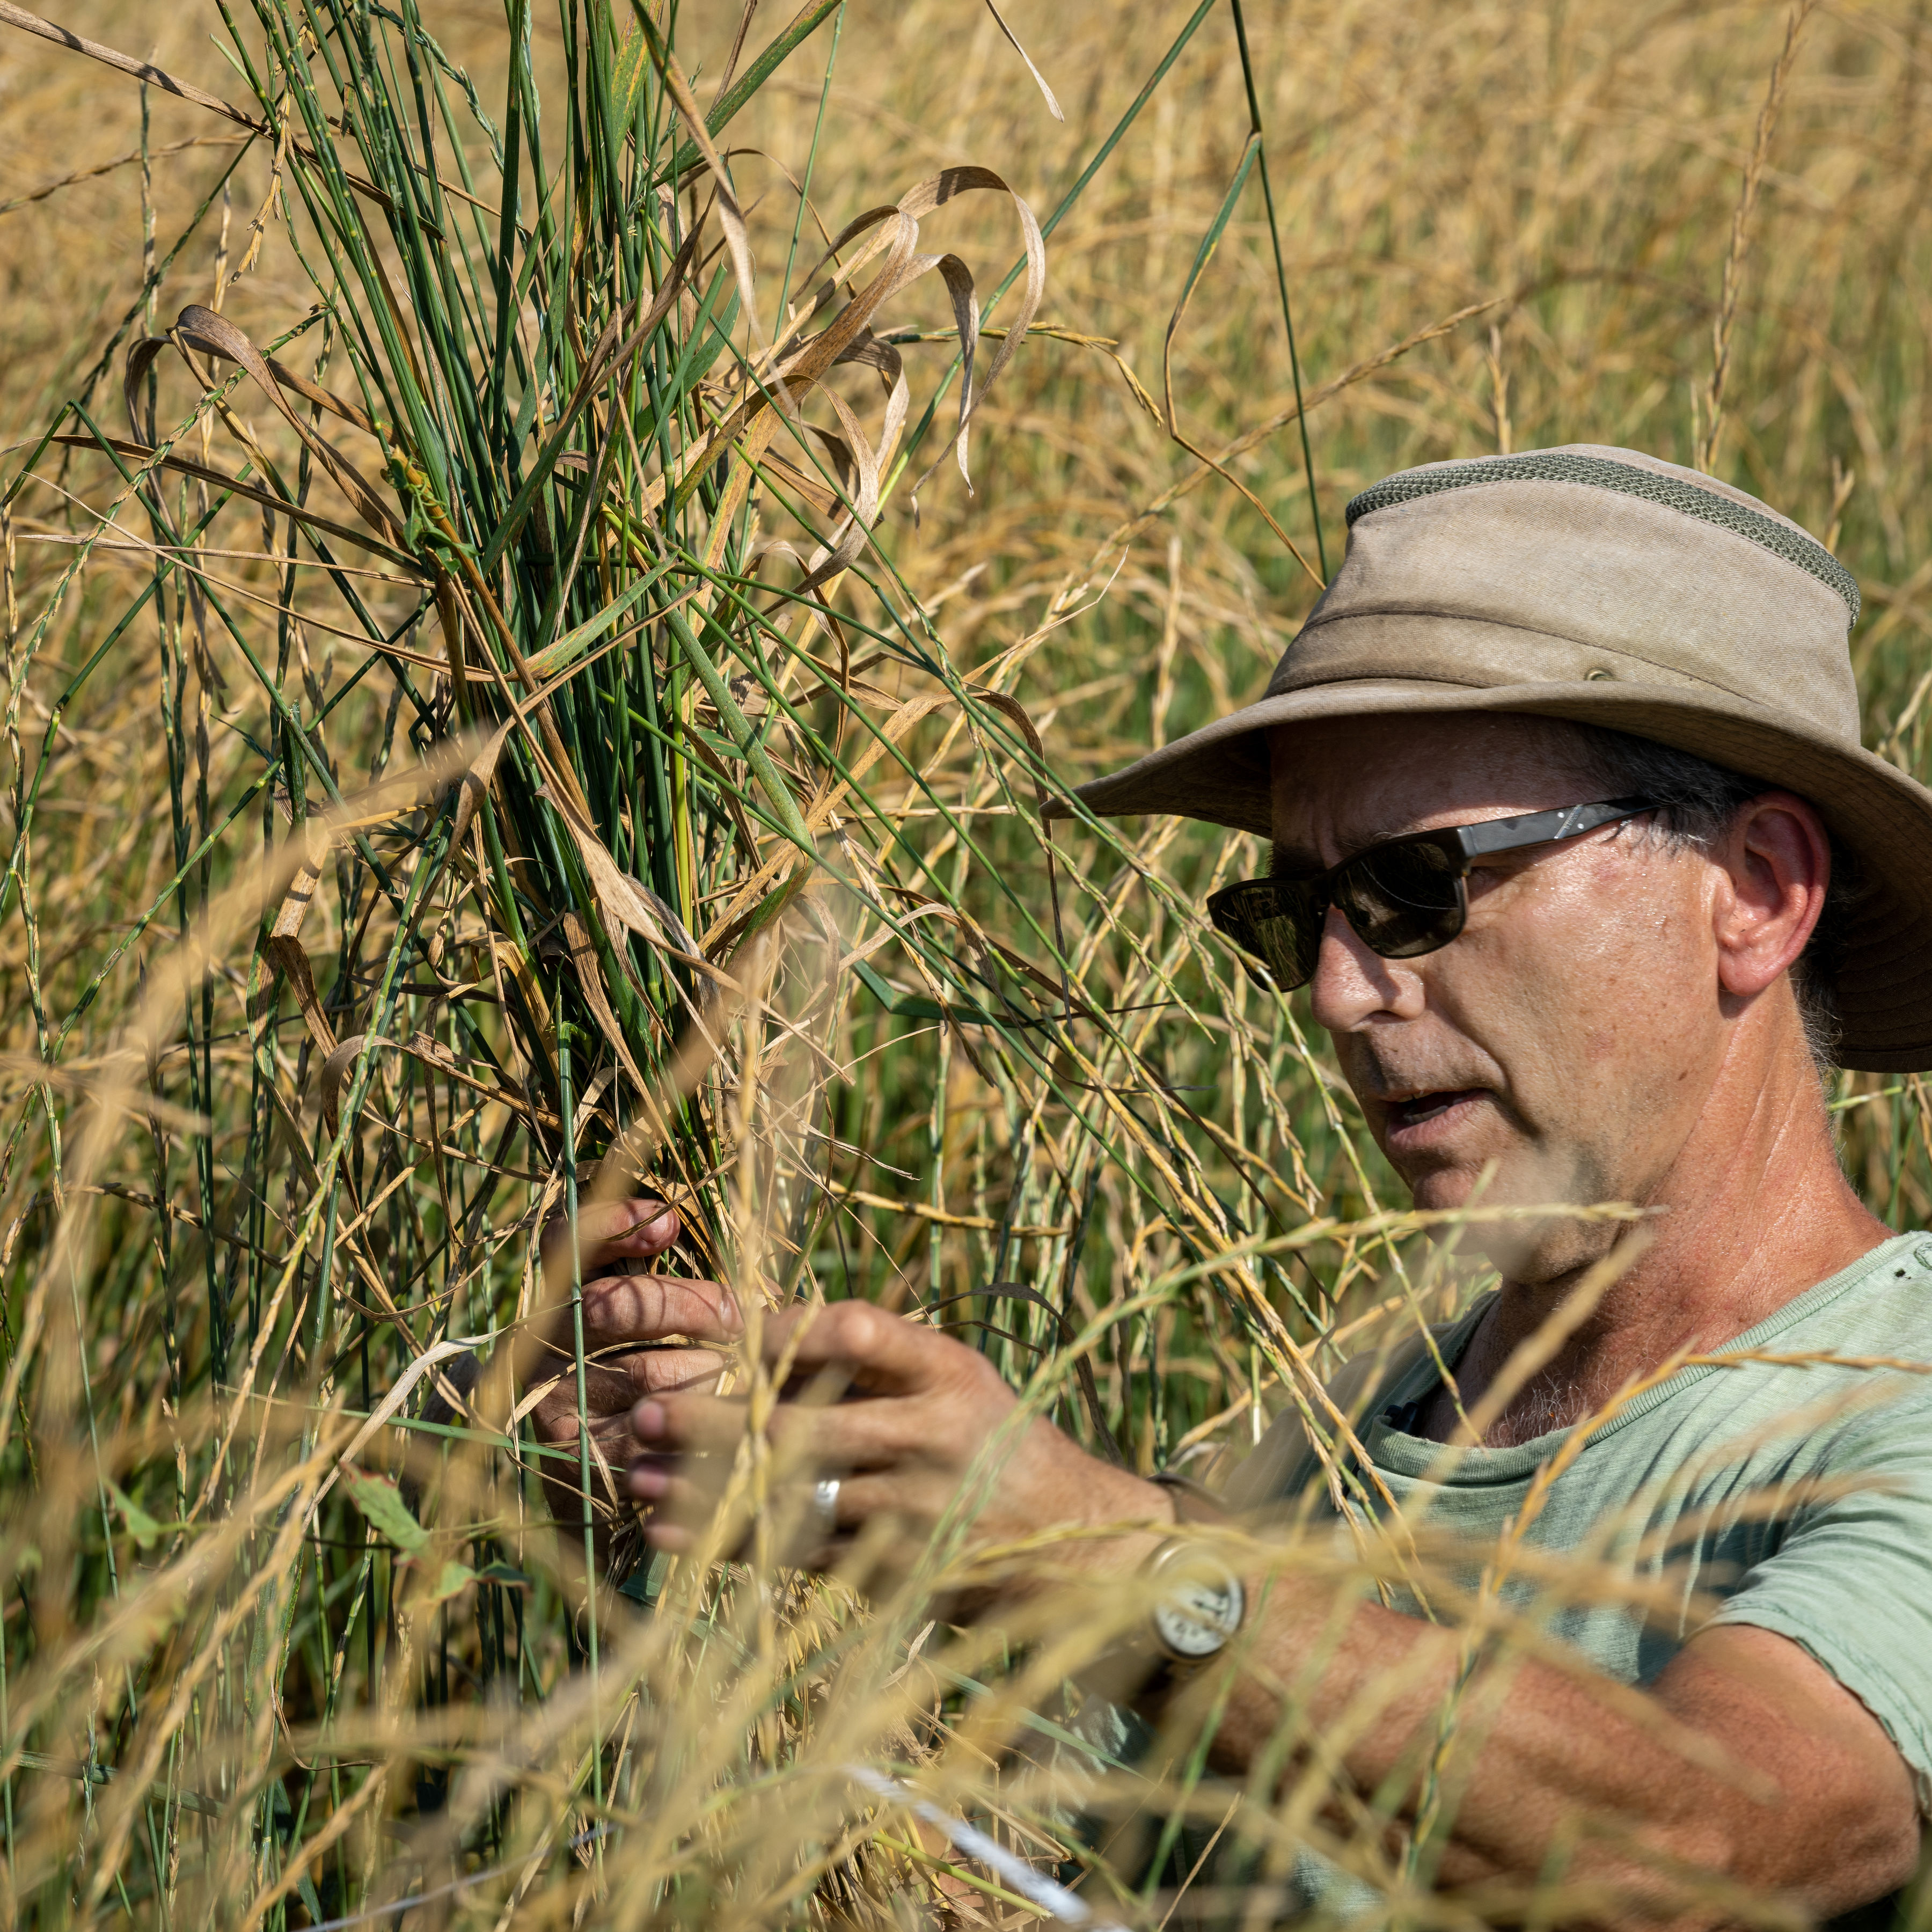 A white man in shaded hat with sunglasses holds a stalk of wheatgrass in a field of grass.